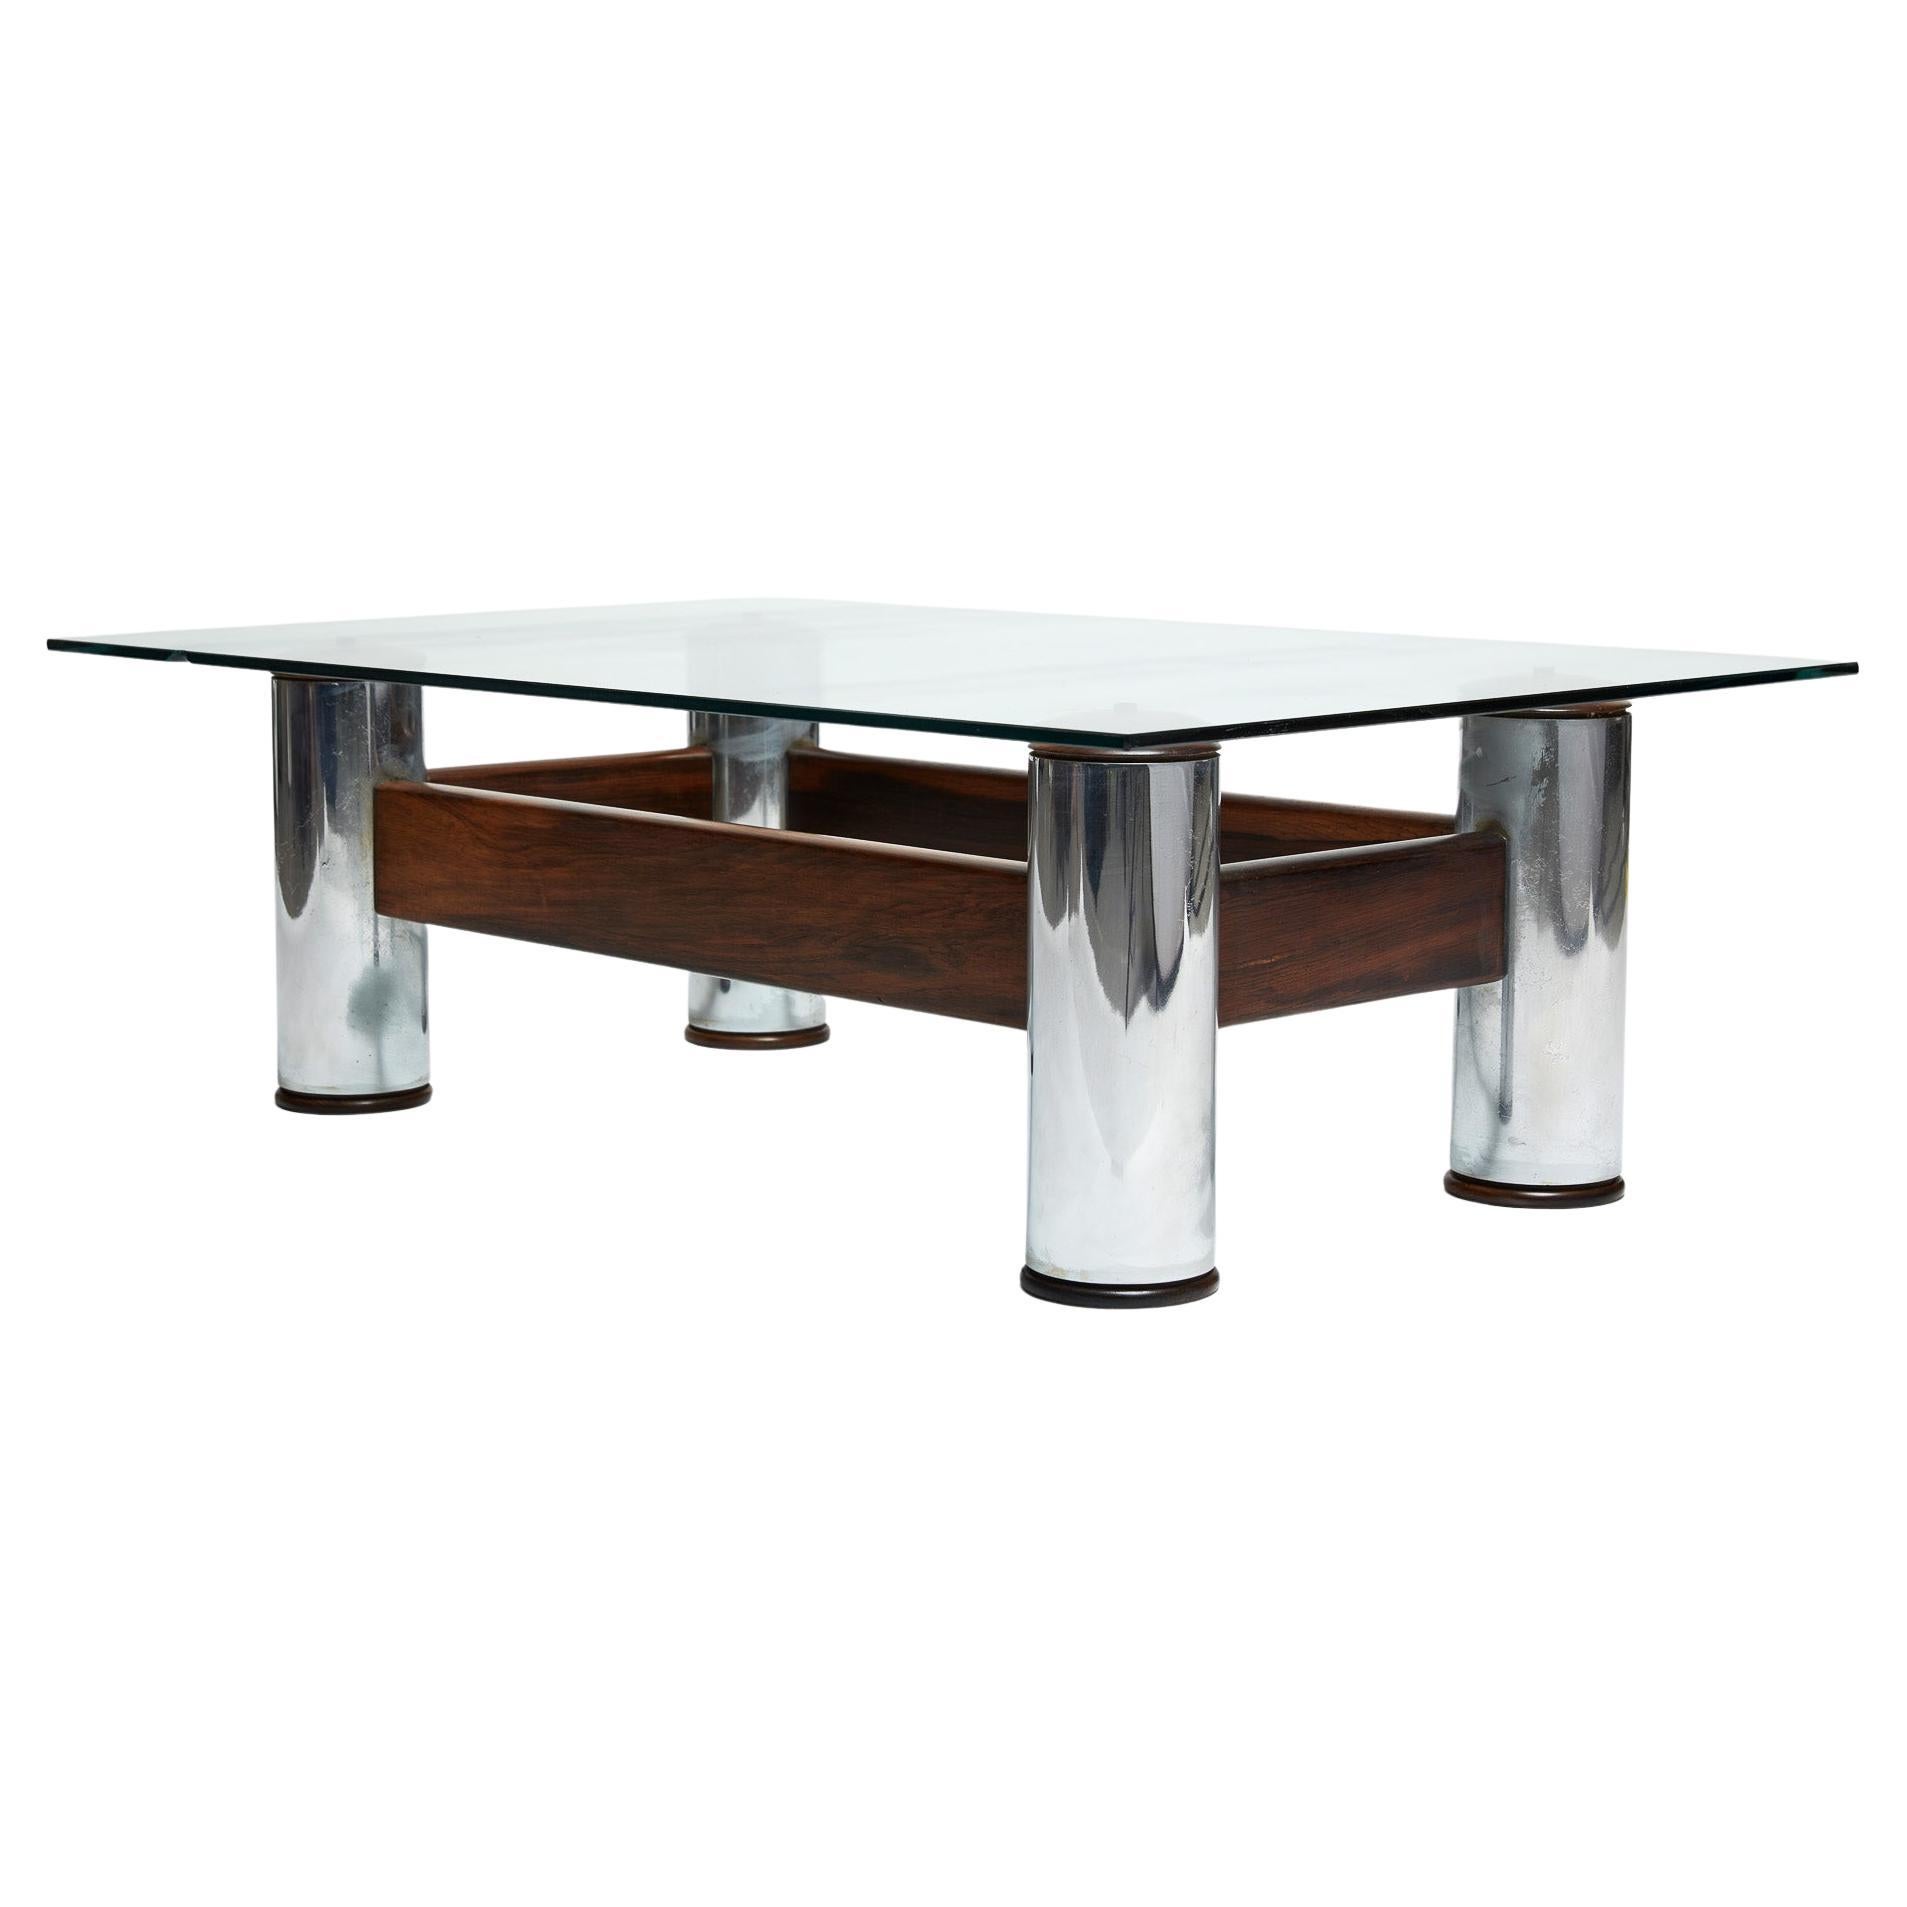 The “Amelia” coffee table has chrome-plated brass tube feet, solid jacaranda (Brazilian rosewood) and a rectangular crystal top of 20mm. The tables were originally designed in two shapes: Squared and rectangular which is the case of this piece